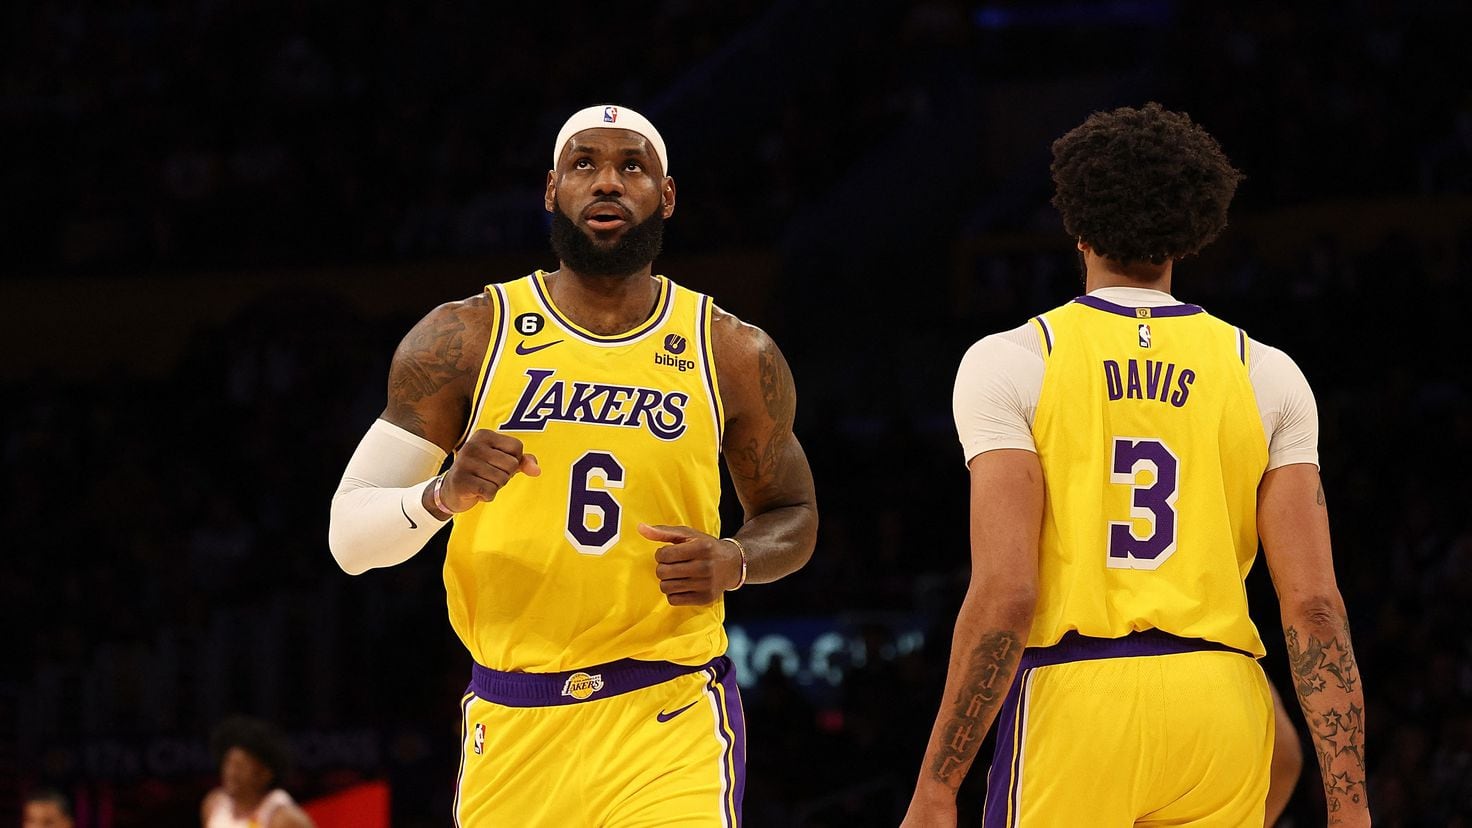 Lakers finally win without LeBron James, Anthony Davis